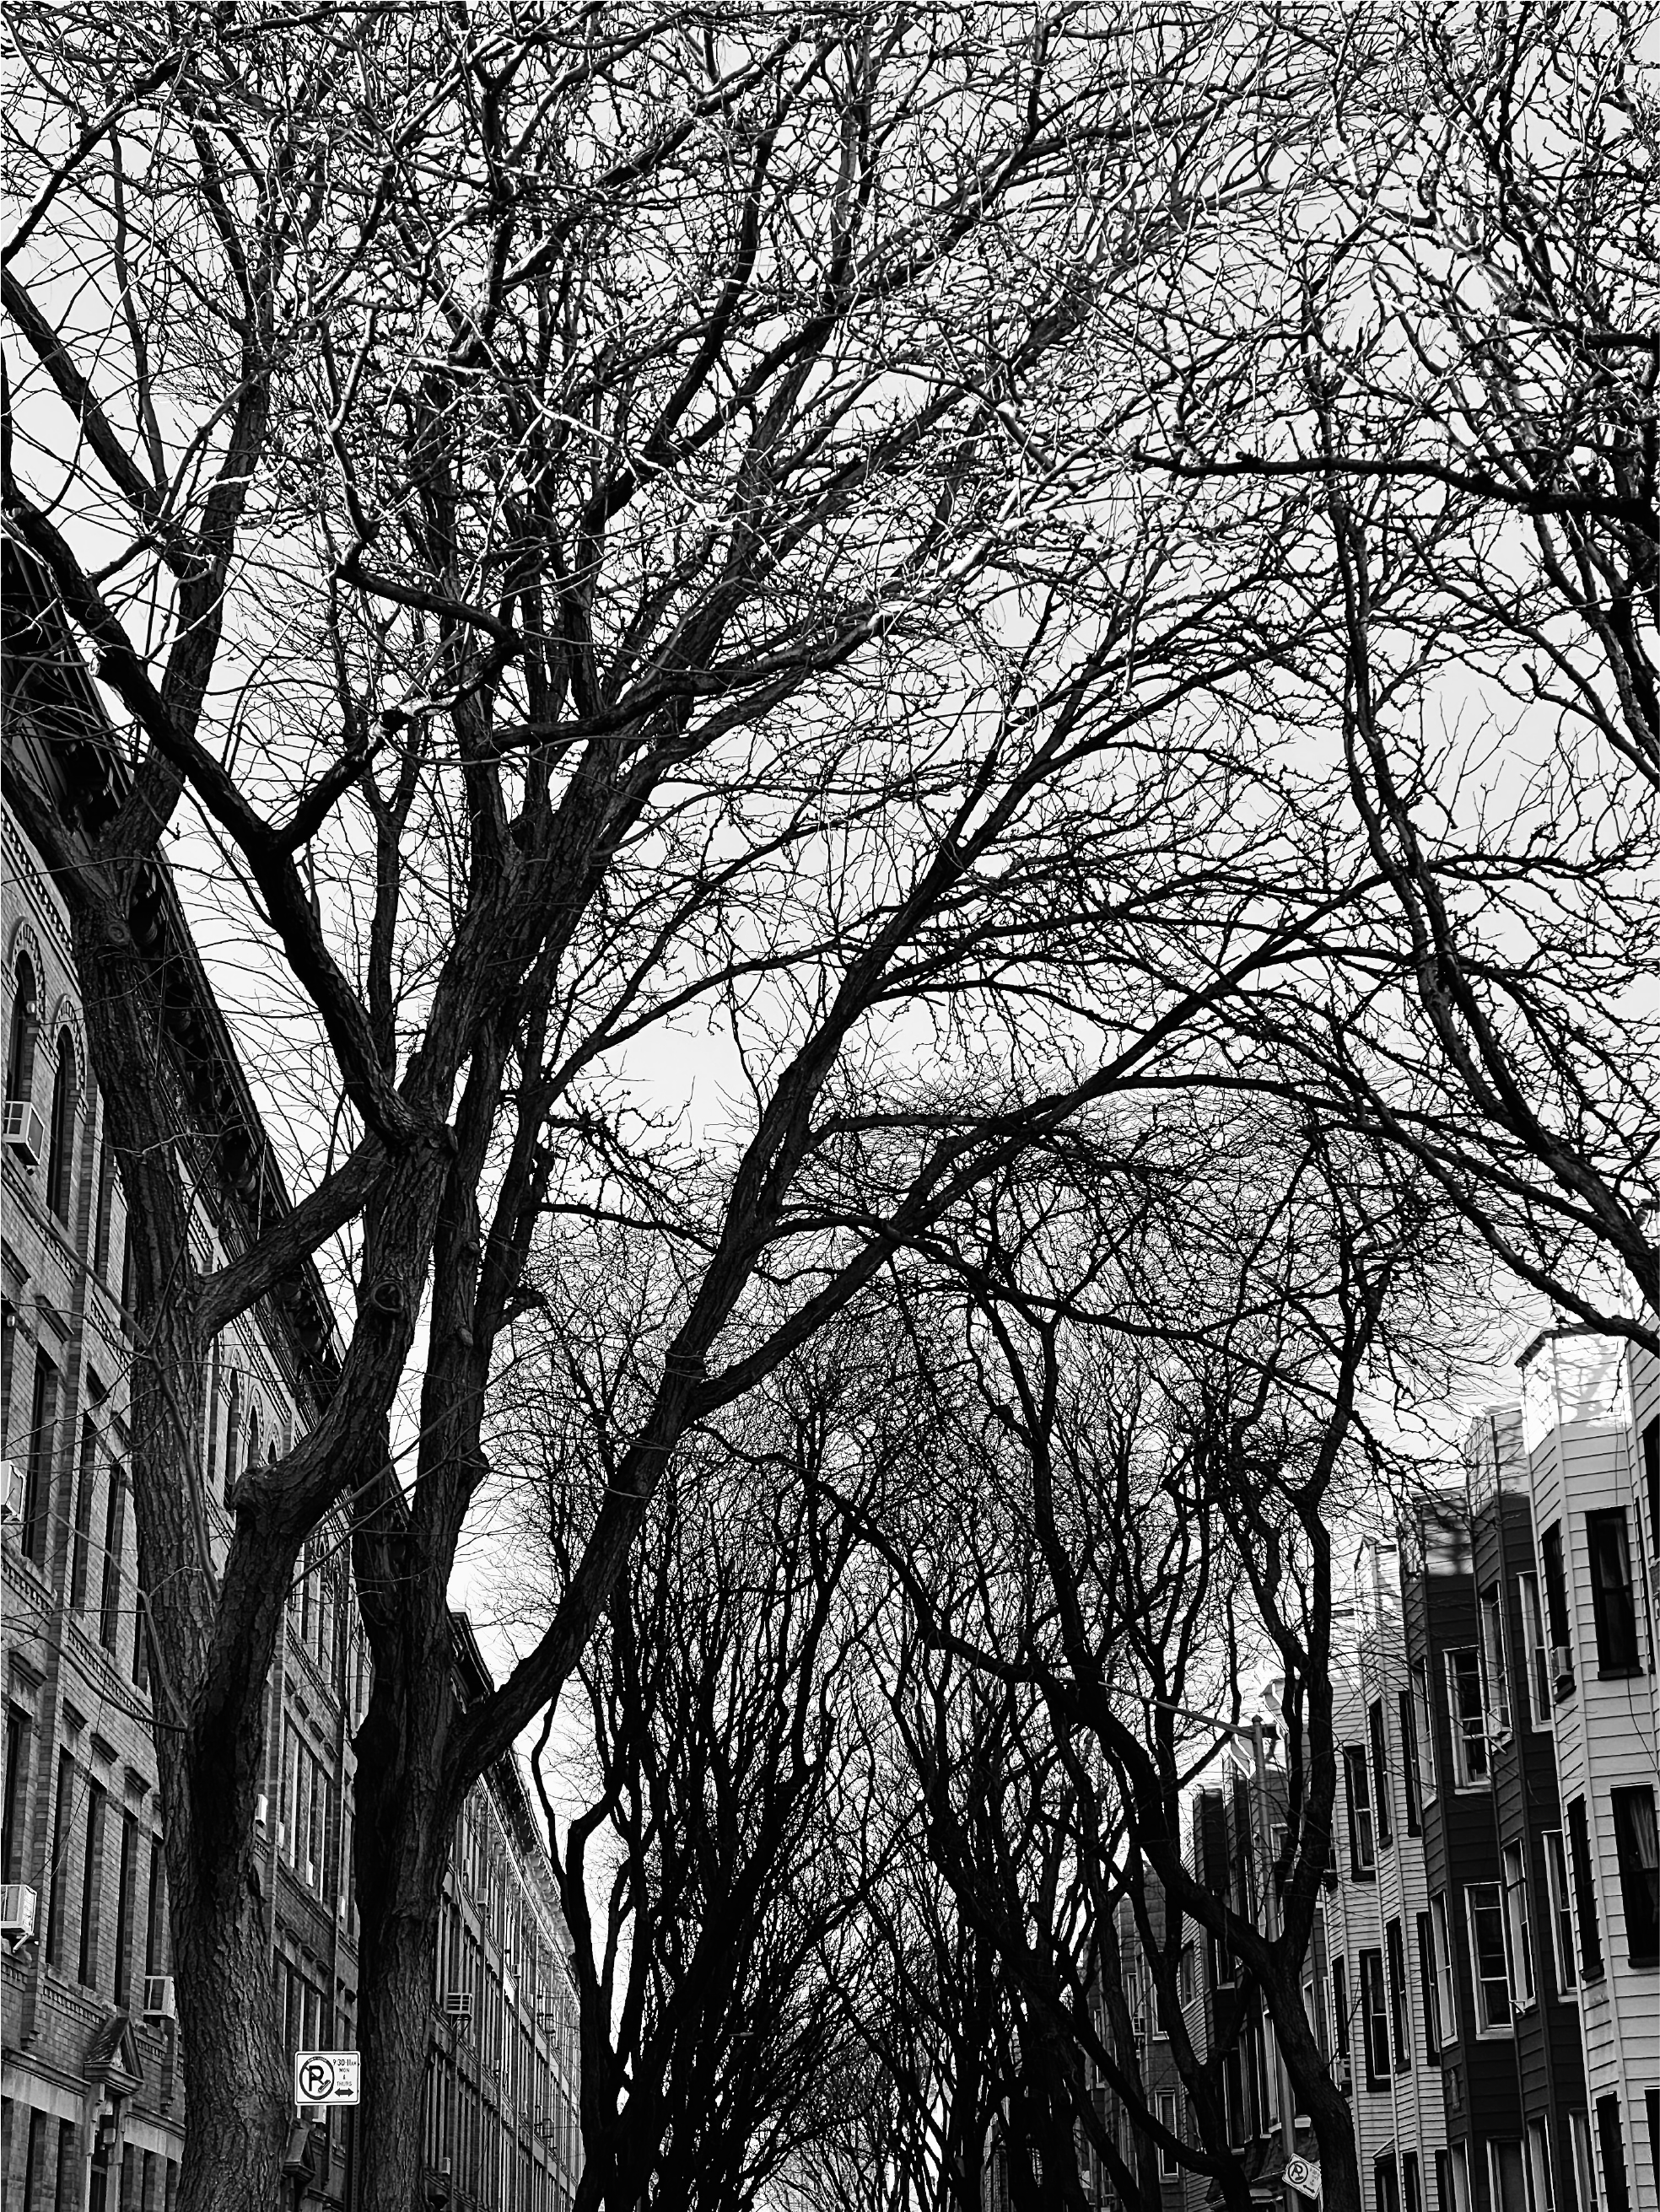 brooklyn buildinga and trees by denise